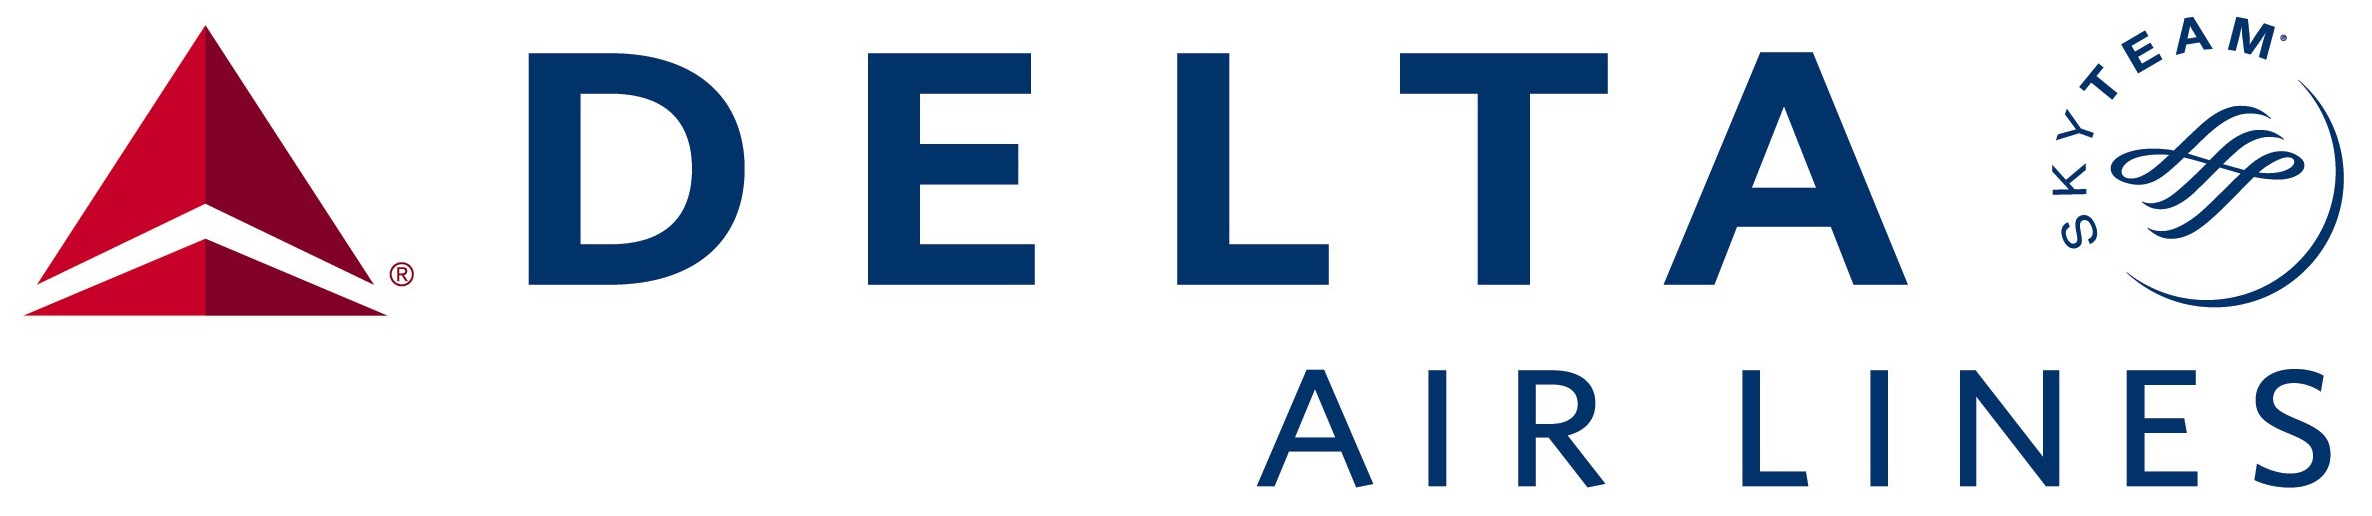 Delta Airlines Logo - Delta Airlines, Transparent background PNG HD thumbnail